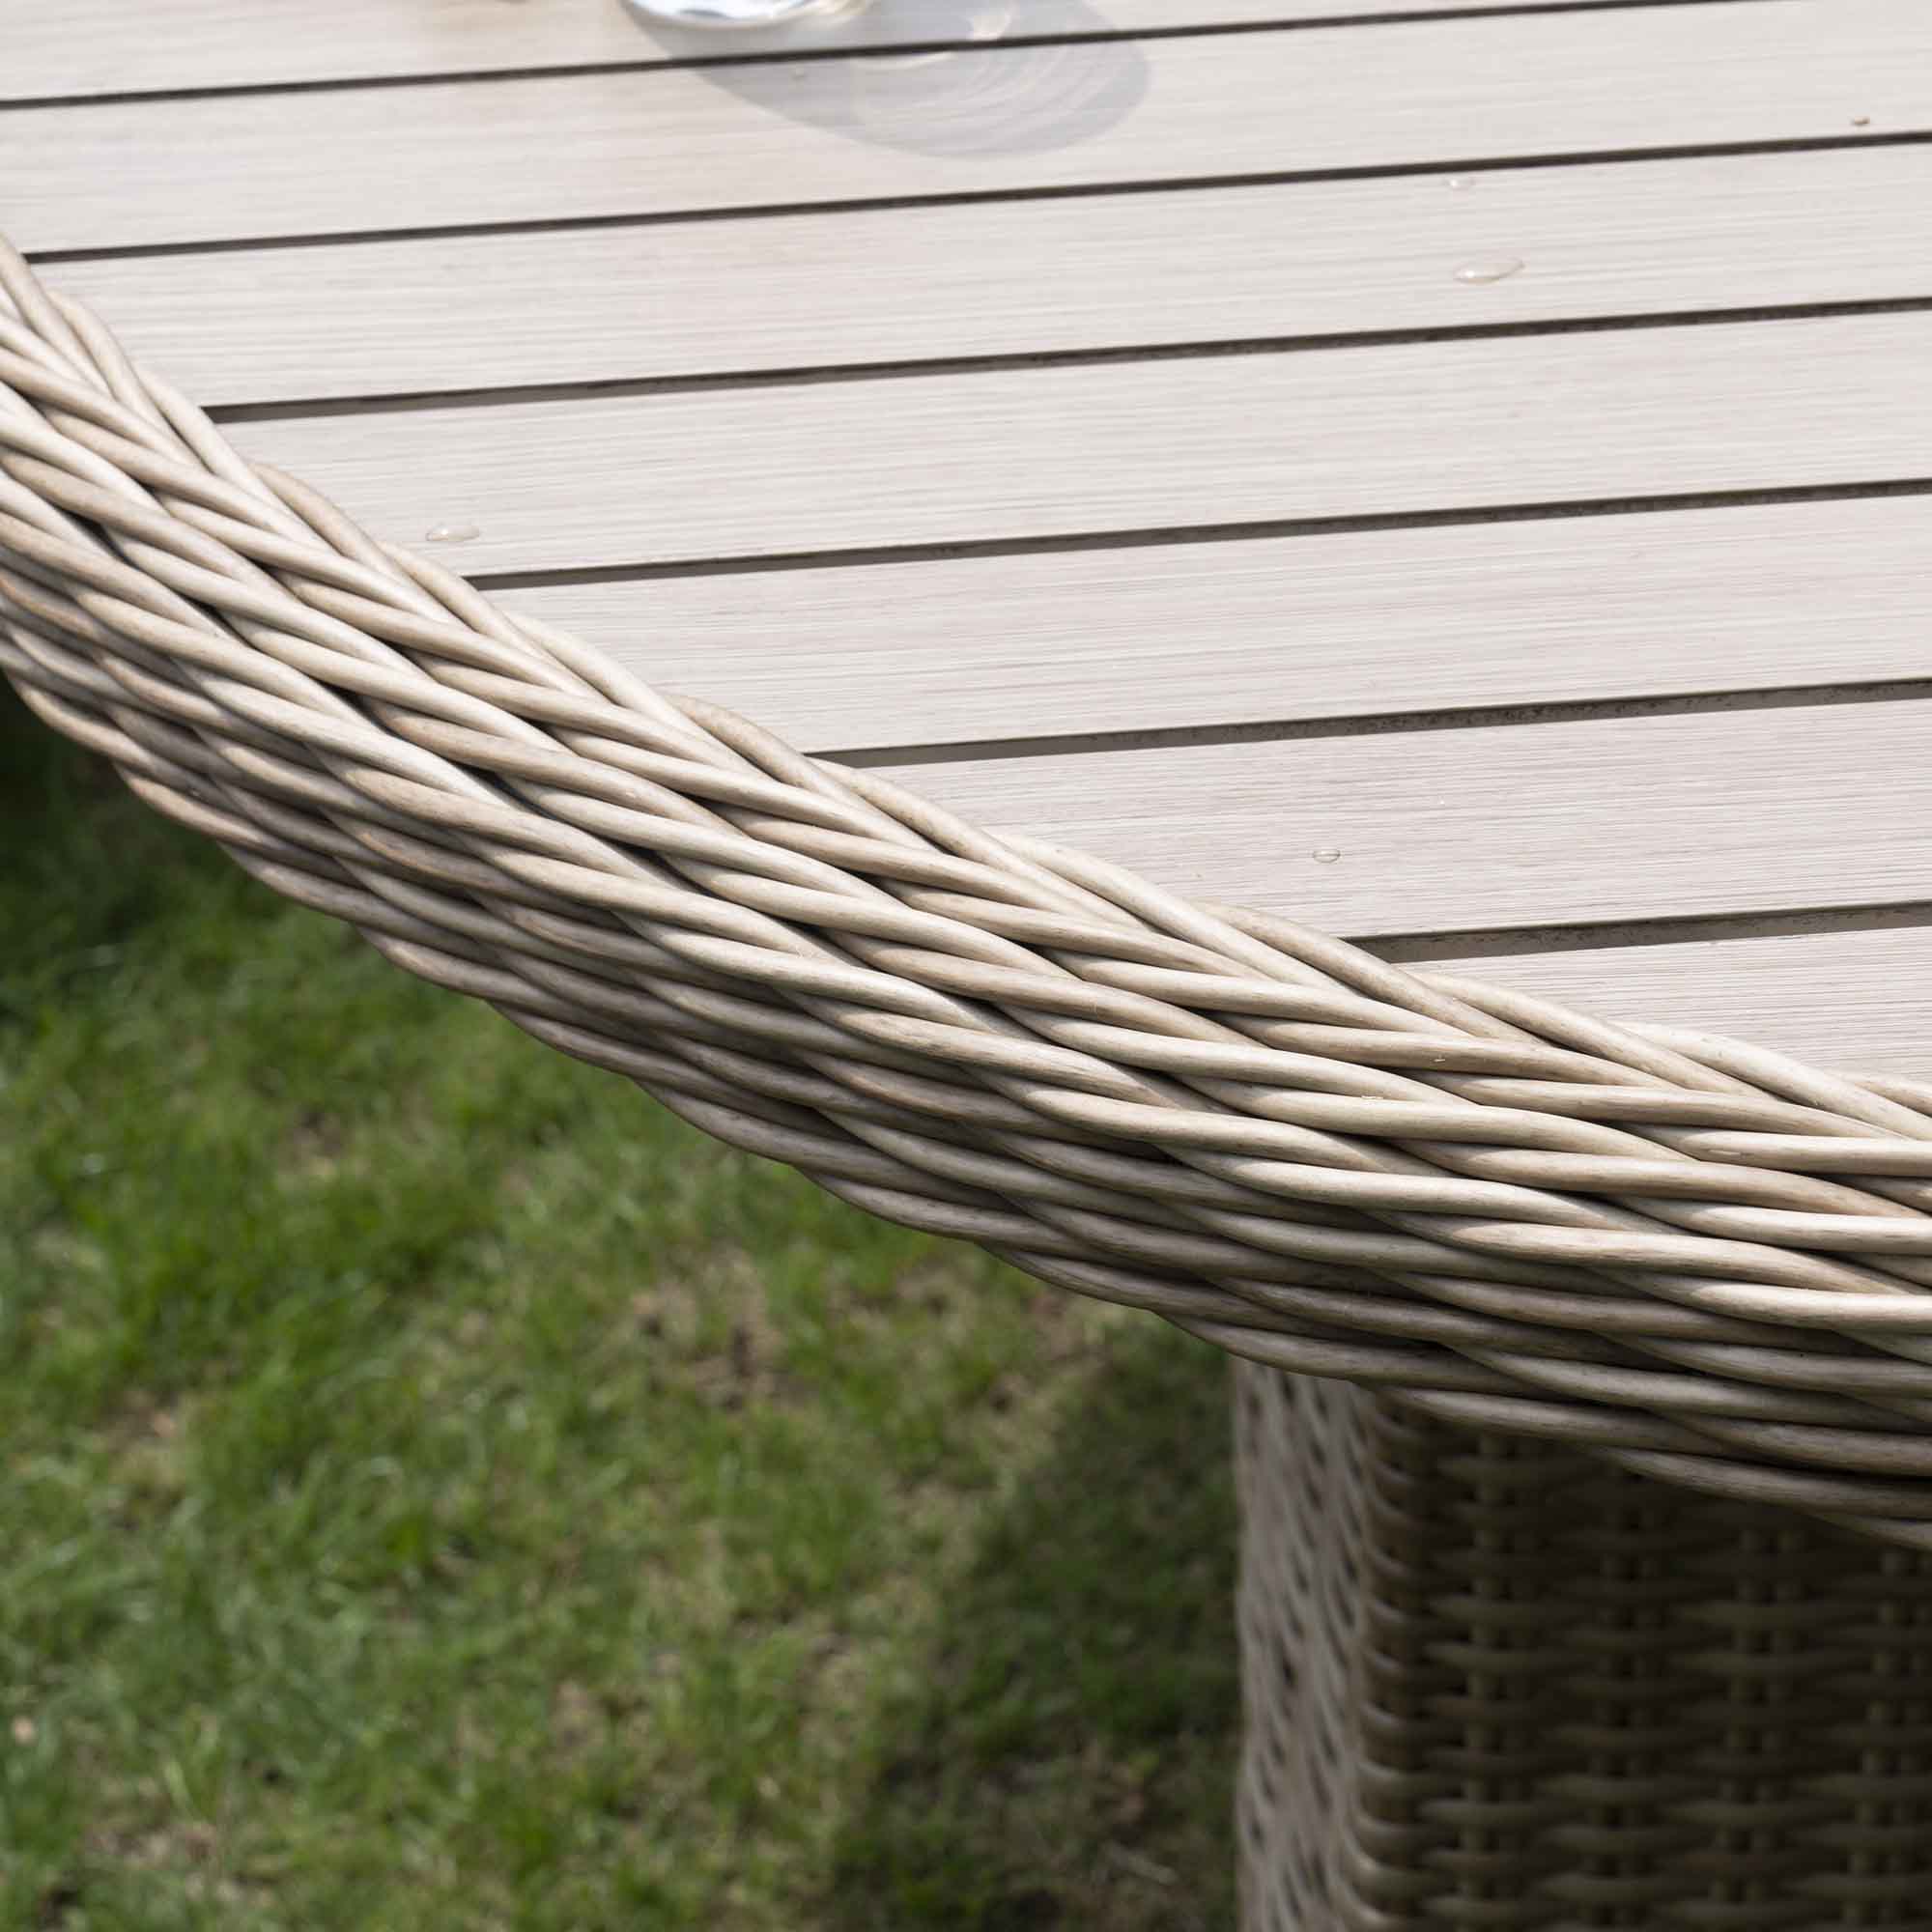 Hampshire 4-Seater Round Wicker Rattan Dining Set, Natural